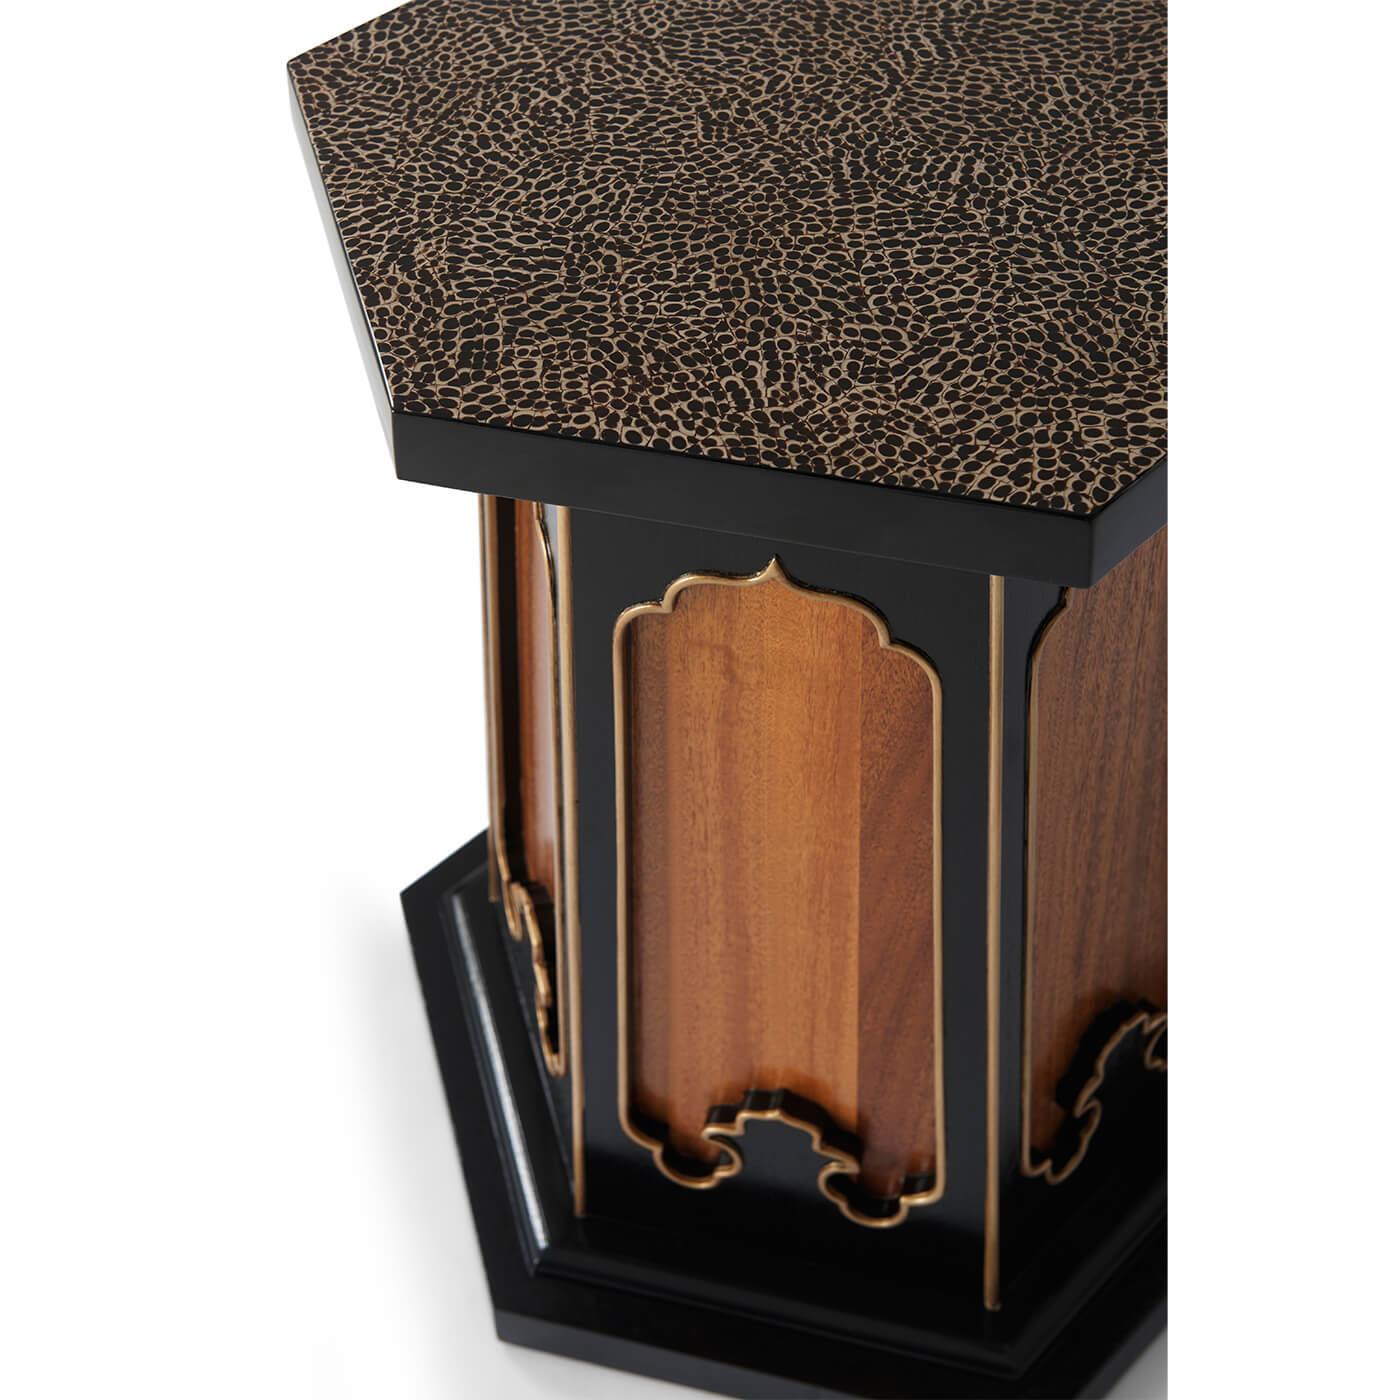 A Moorish style mid-century accent table. With Moorish recessed panels framed in ebony with gilt details repeat on the end table’s hexagon base. The eggshell inlaid tabletop is perfect for a cocktail – or two. Set on a plinth base.

Dimensions: